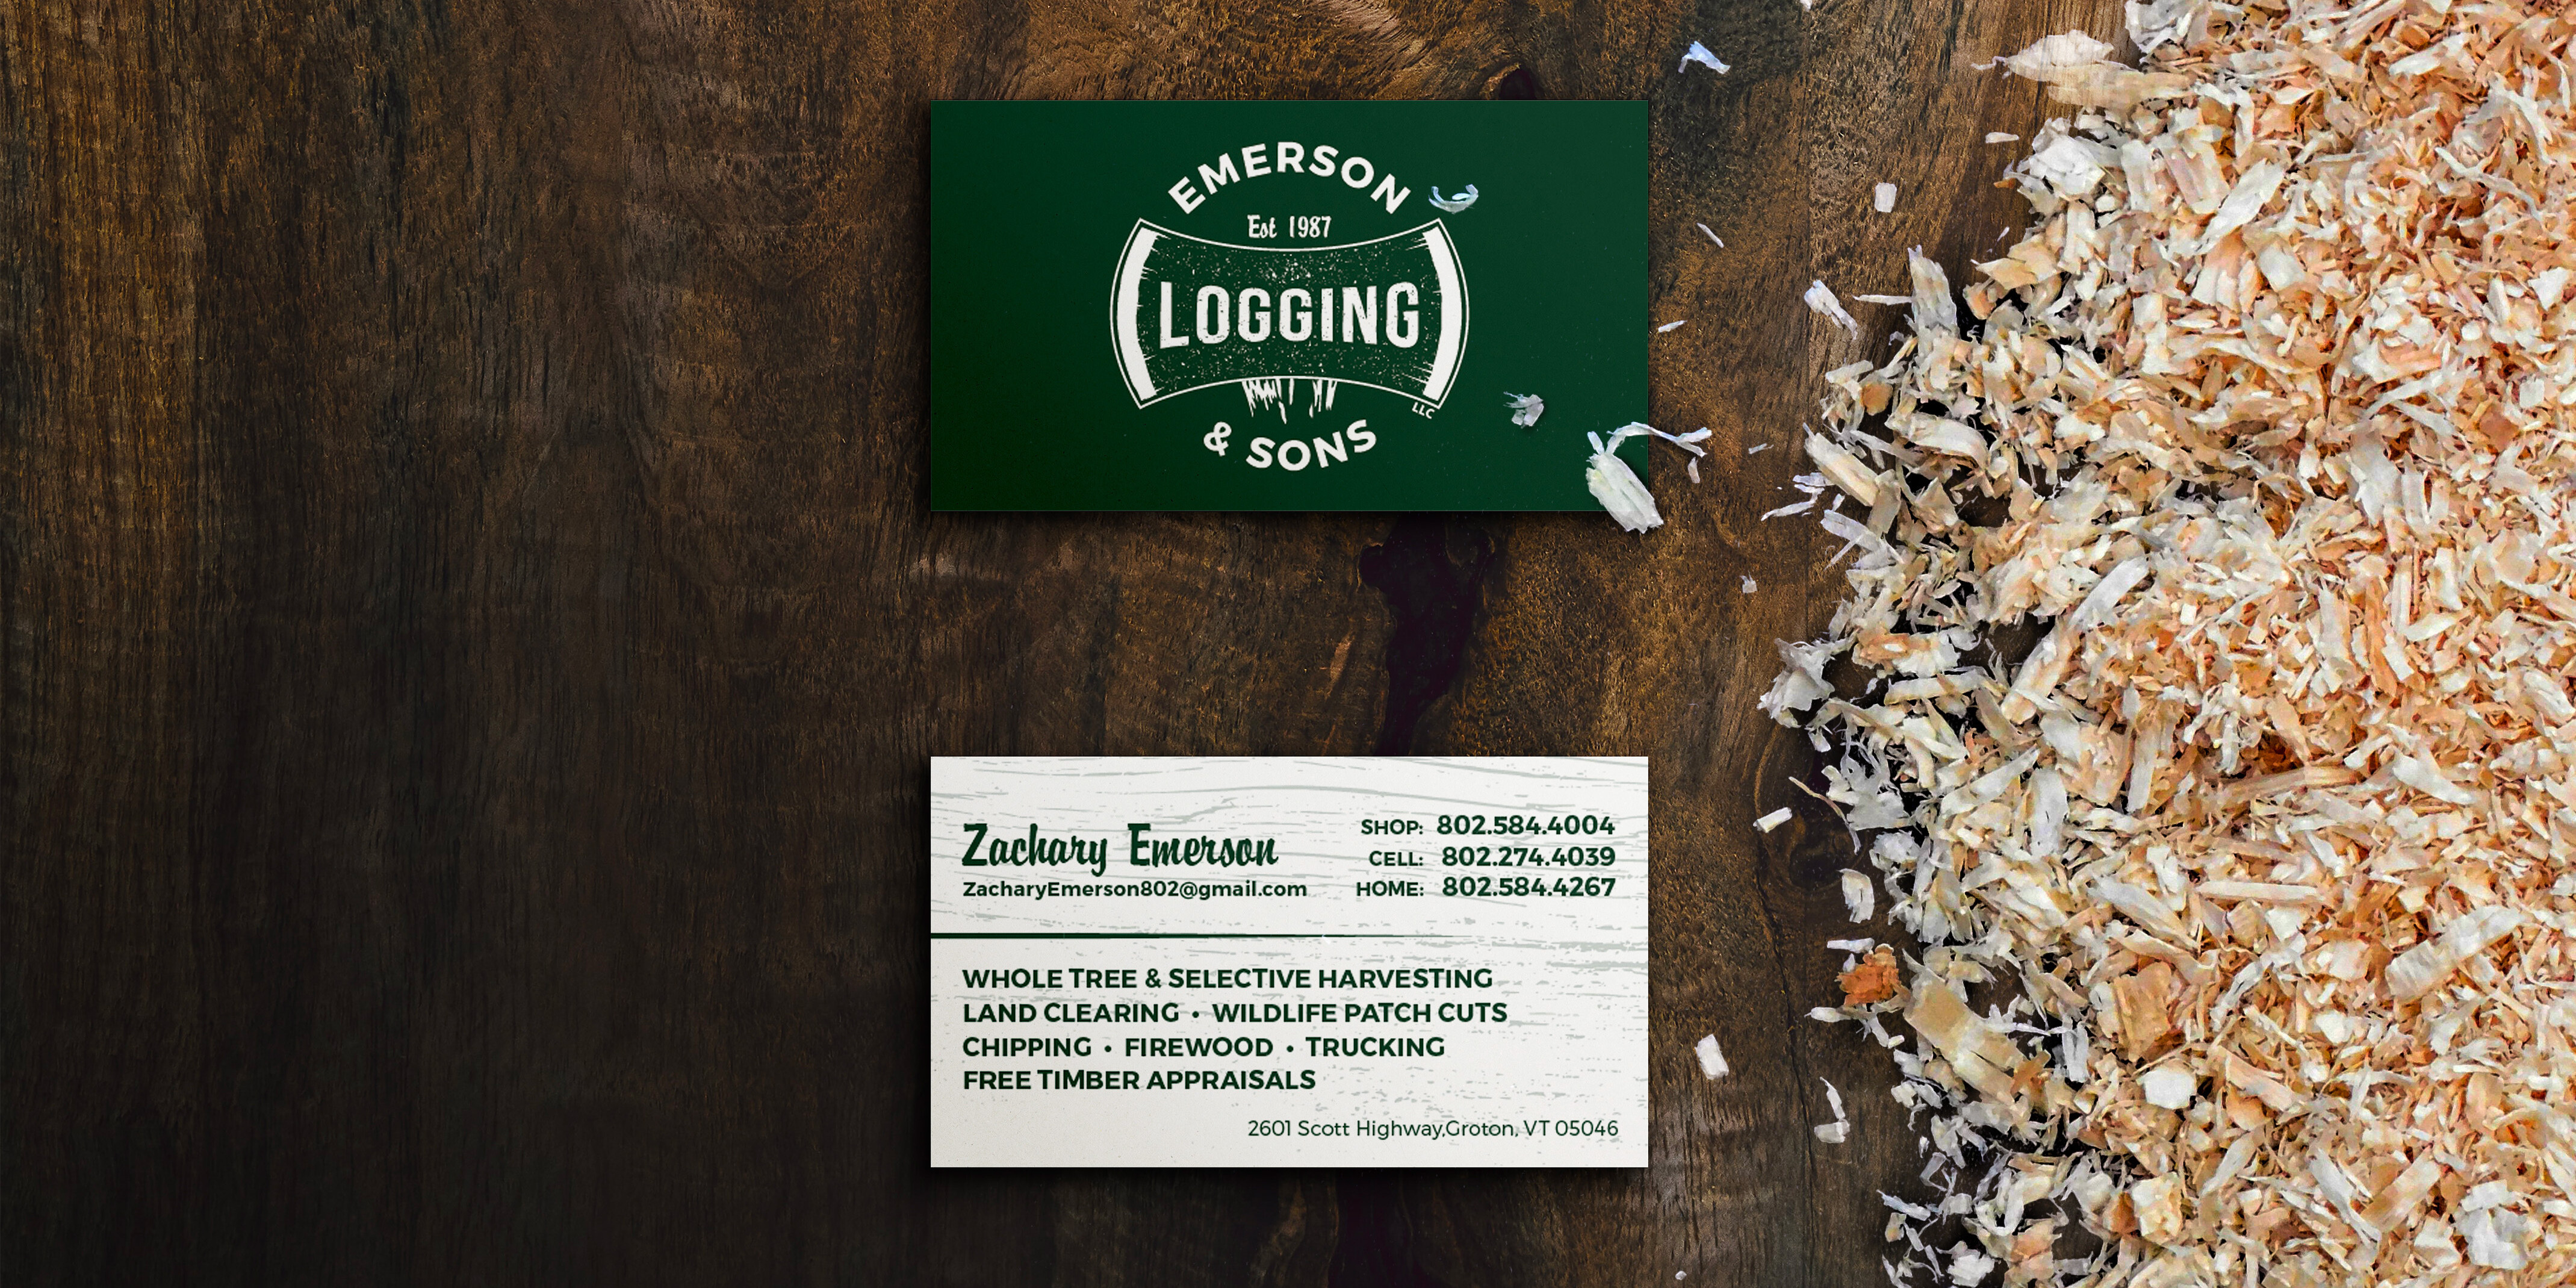 Great Big Graphics Business Card Mock Up for Emerson & Sons Logging